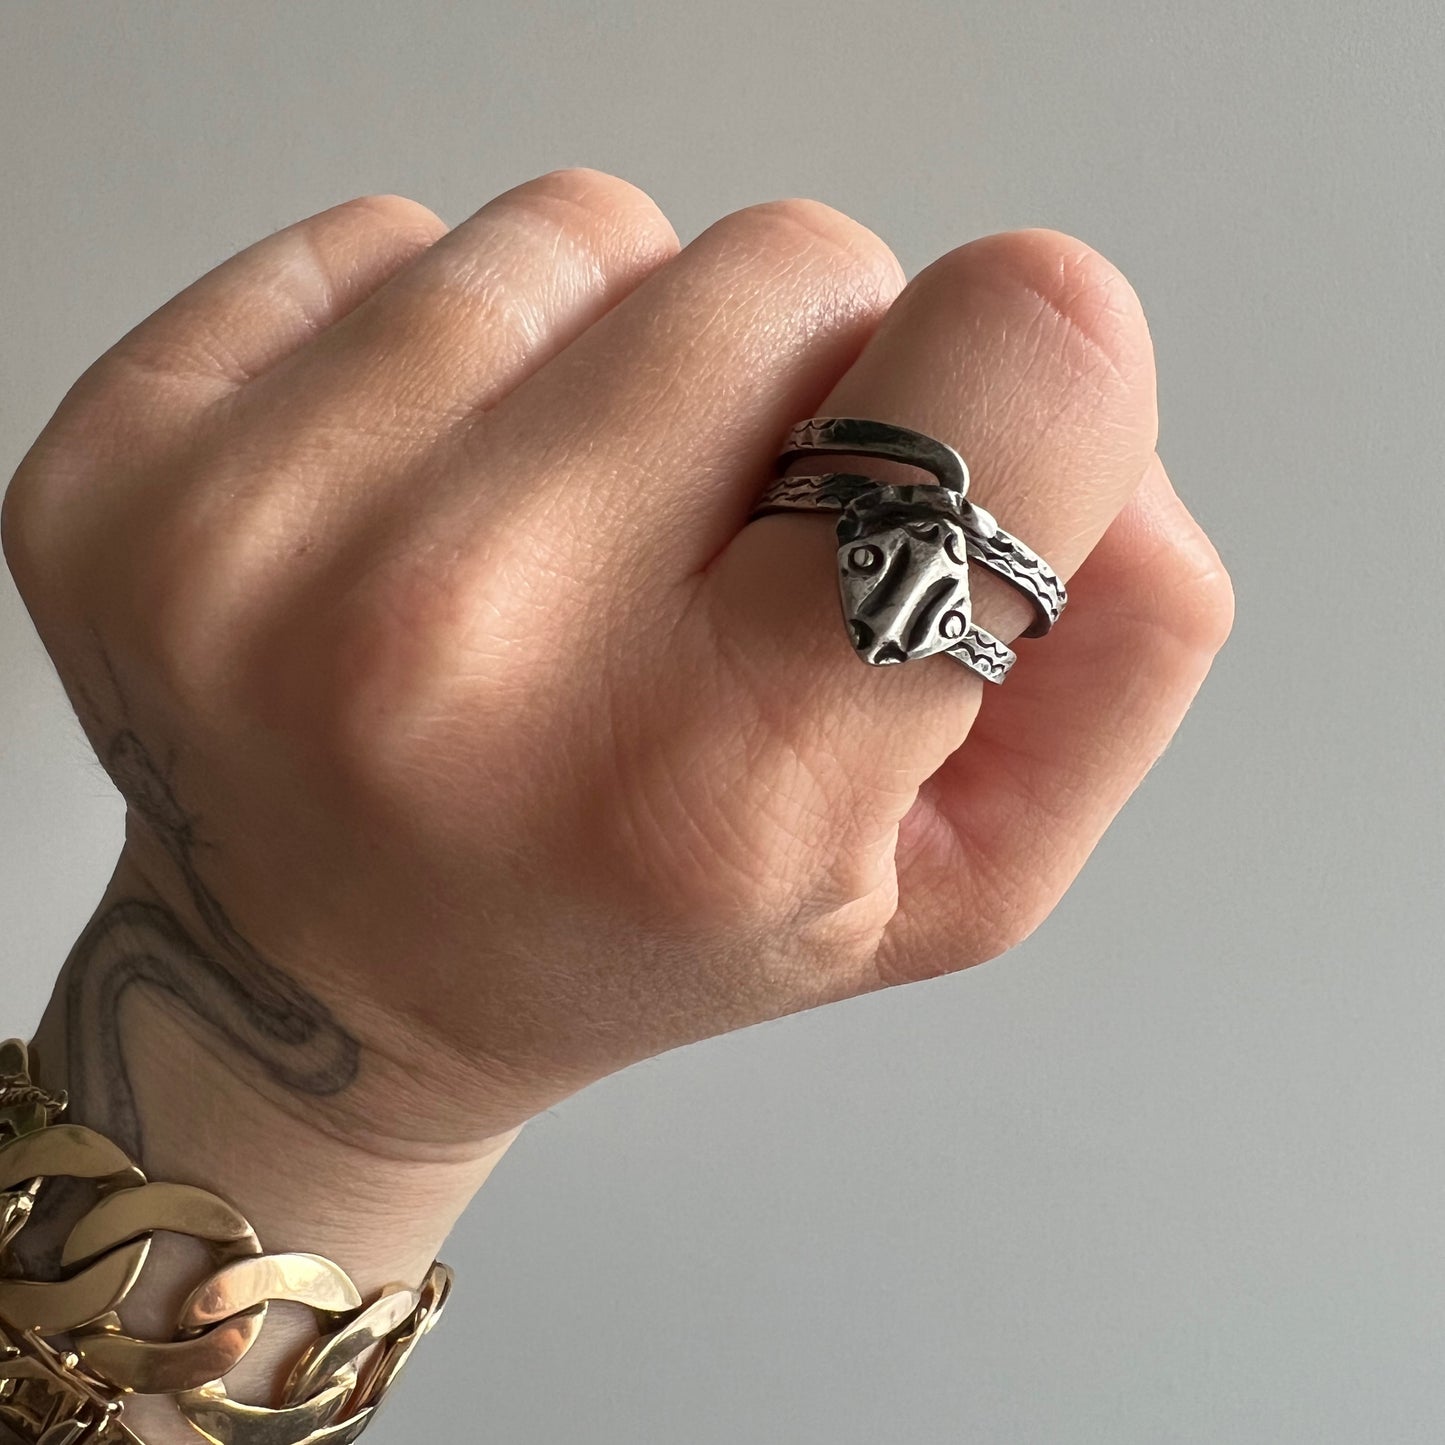 V I N T A G E // quiet rattle / sterling silver Mexican wrap around snake ring / size 7-ish